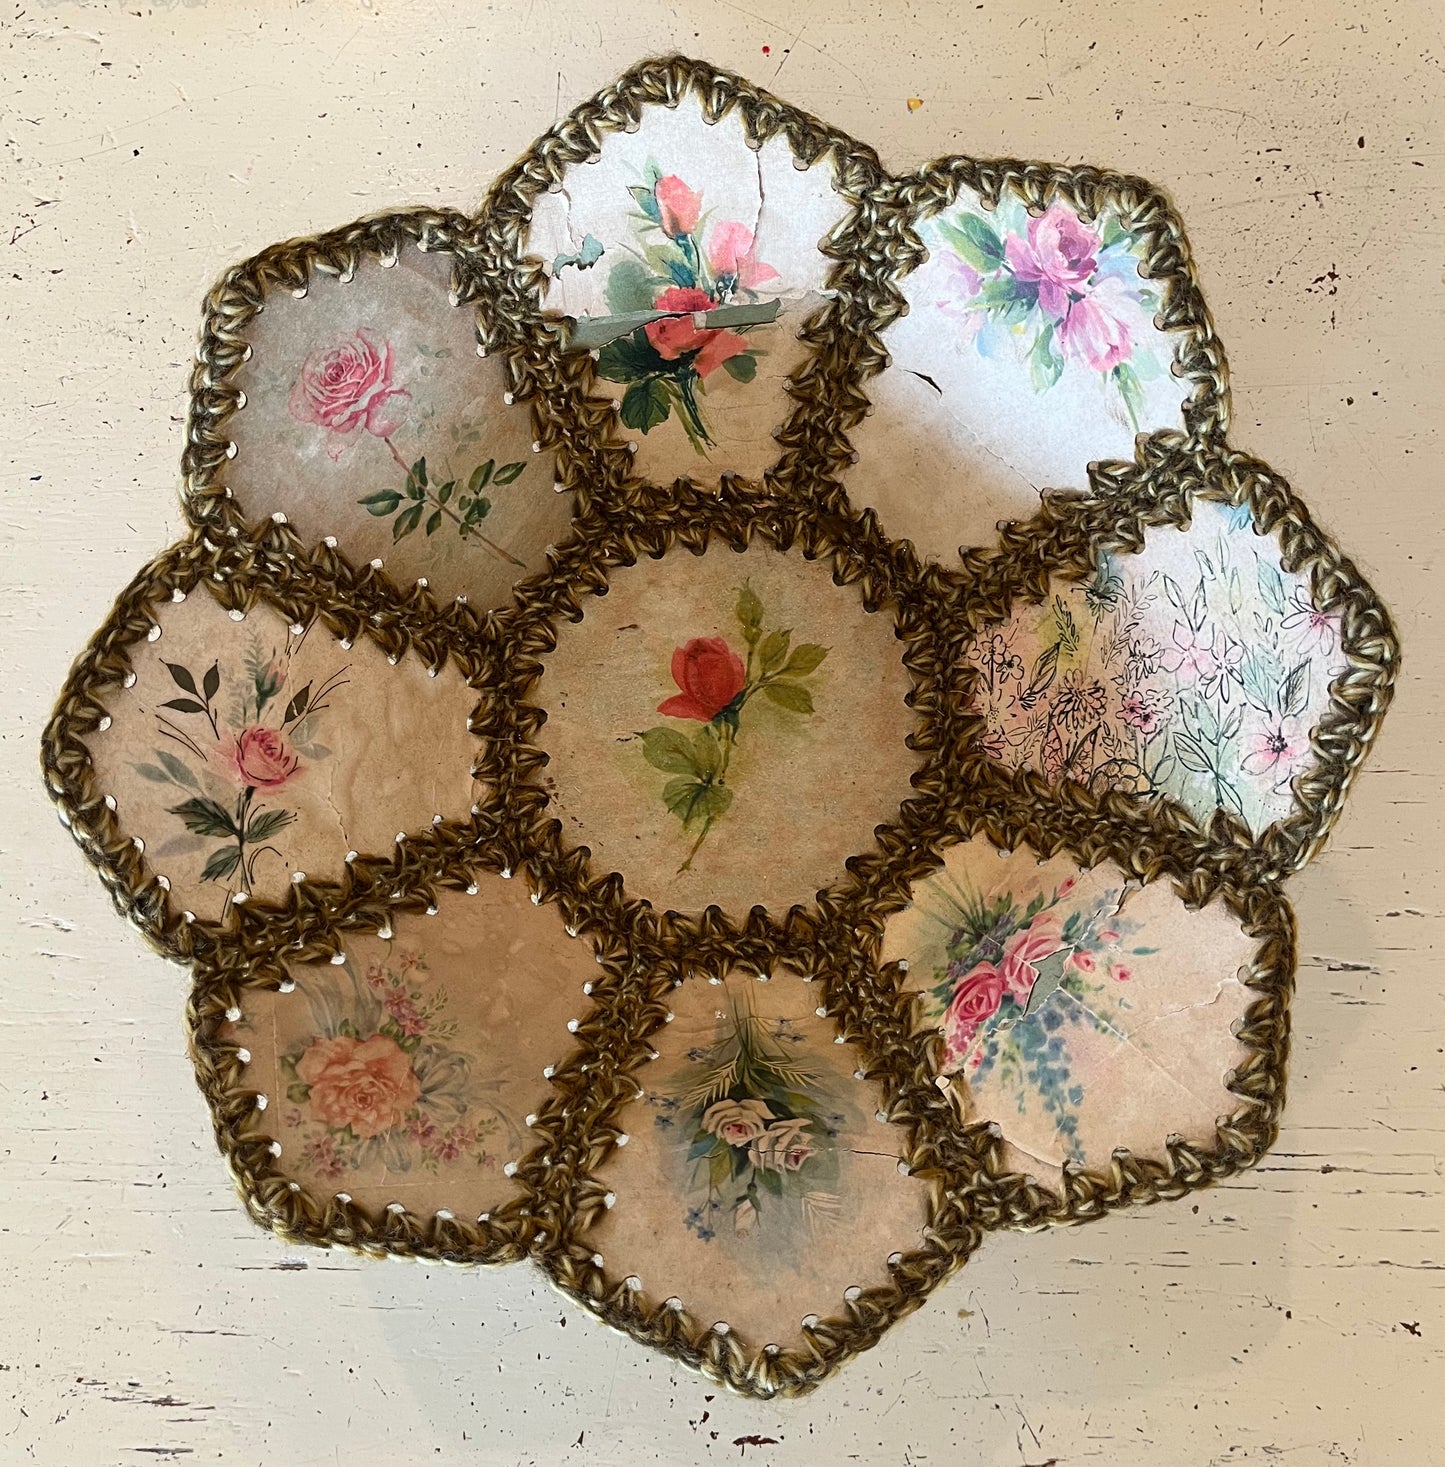 Floral Paper Crocheted Bowl